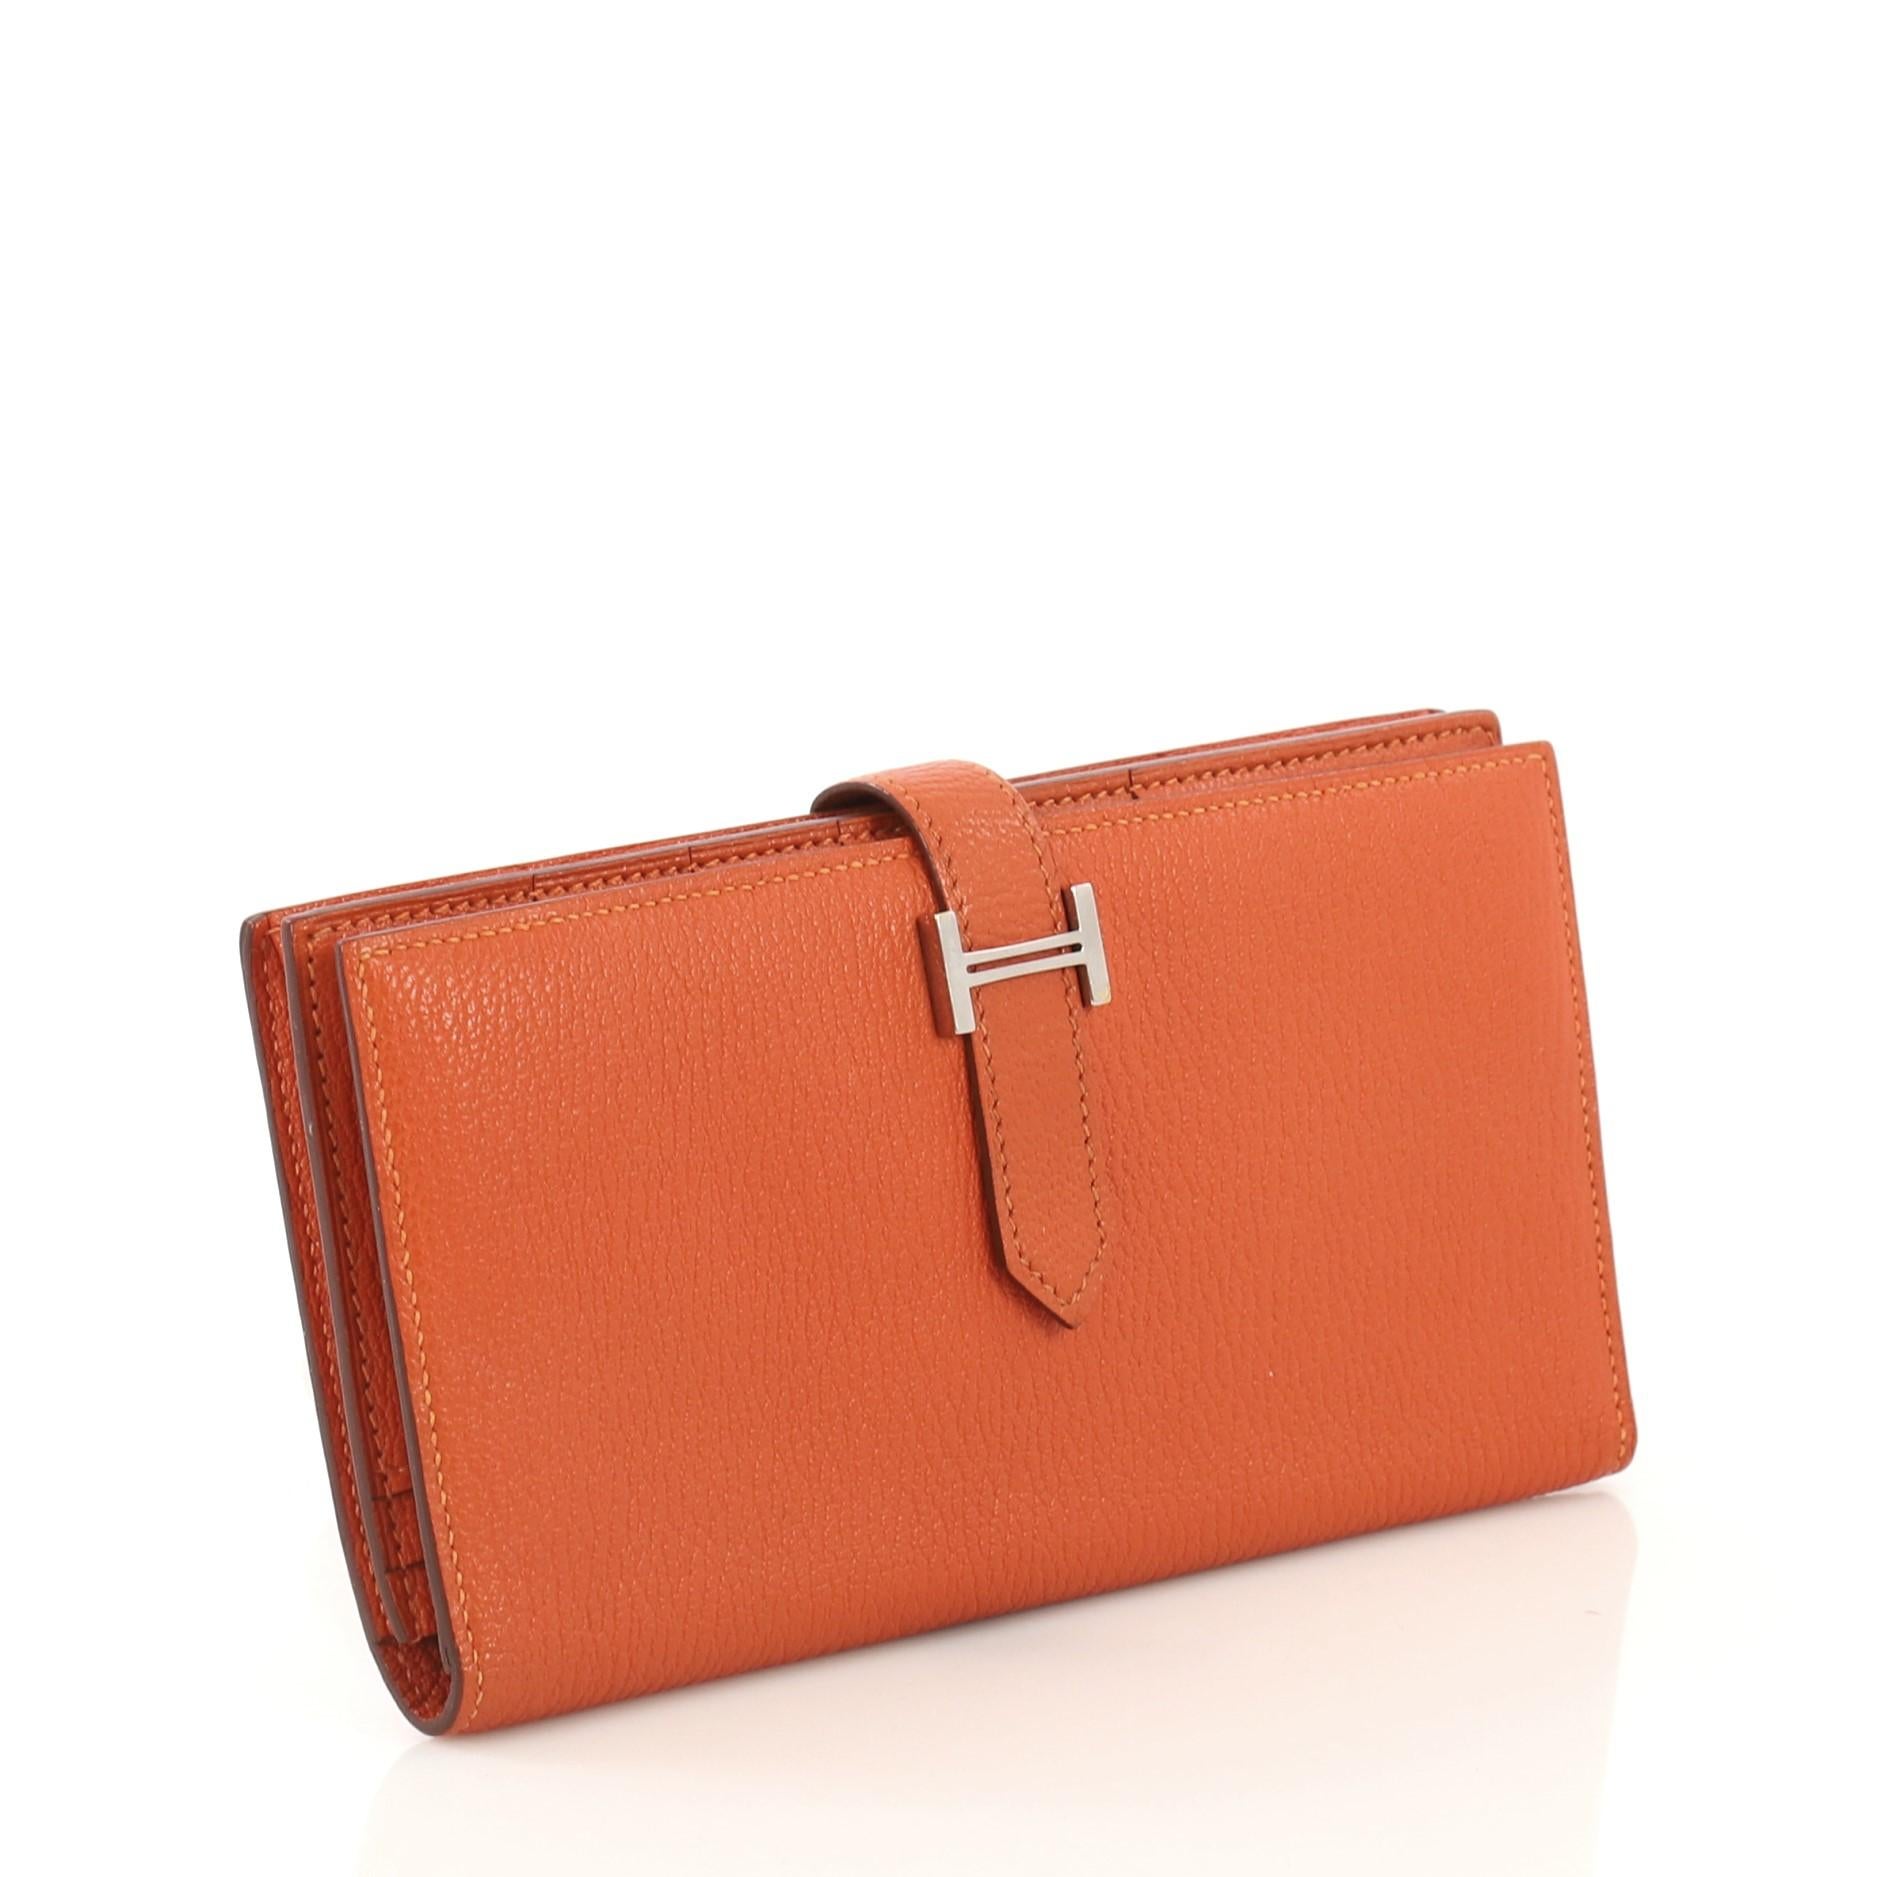 This Hermes Bearn Wallet Chevre Mysore Long, crafted from Orange H orange Chevre Mysore leather, features a plated 'H' tab closure and palladium hardware. Its tab closure opens to an Orange H orange Chevre leather interior with multiple card slots